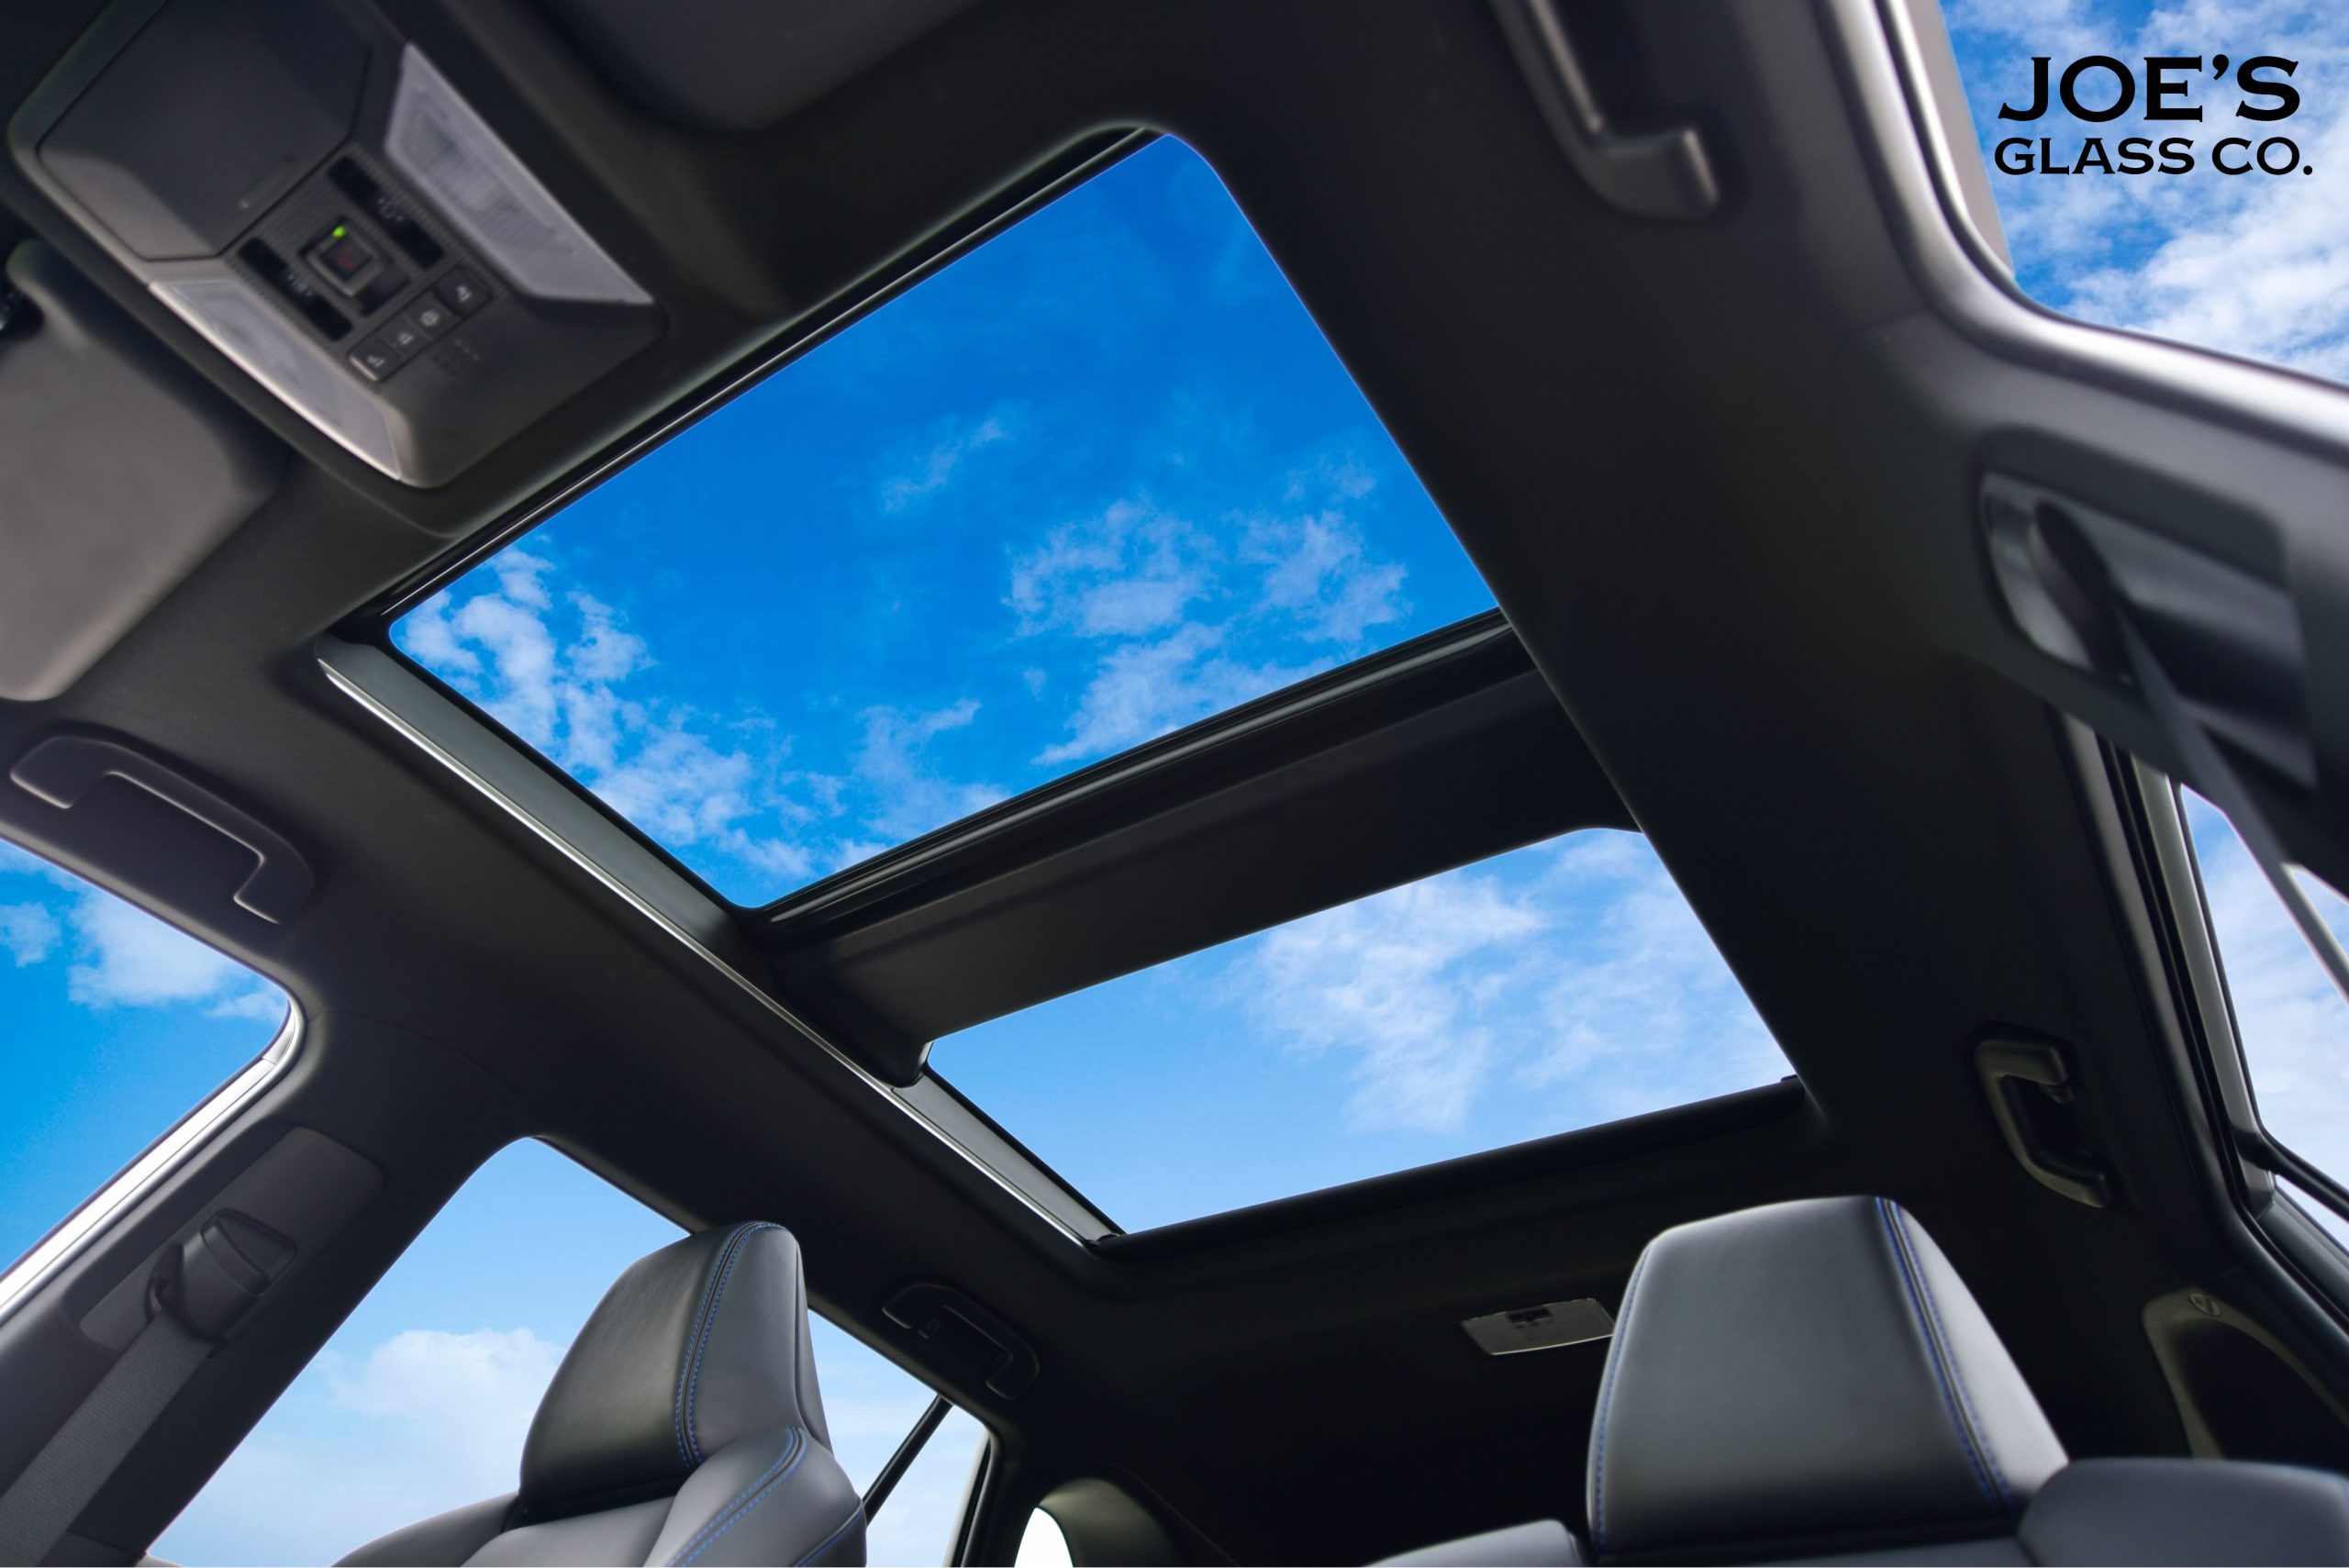 Repair Your Vehicle’s Sunroof Glass with Specialty Services from Joe’s Glass Co.